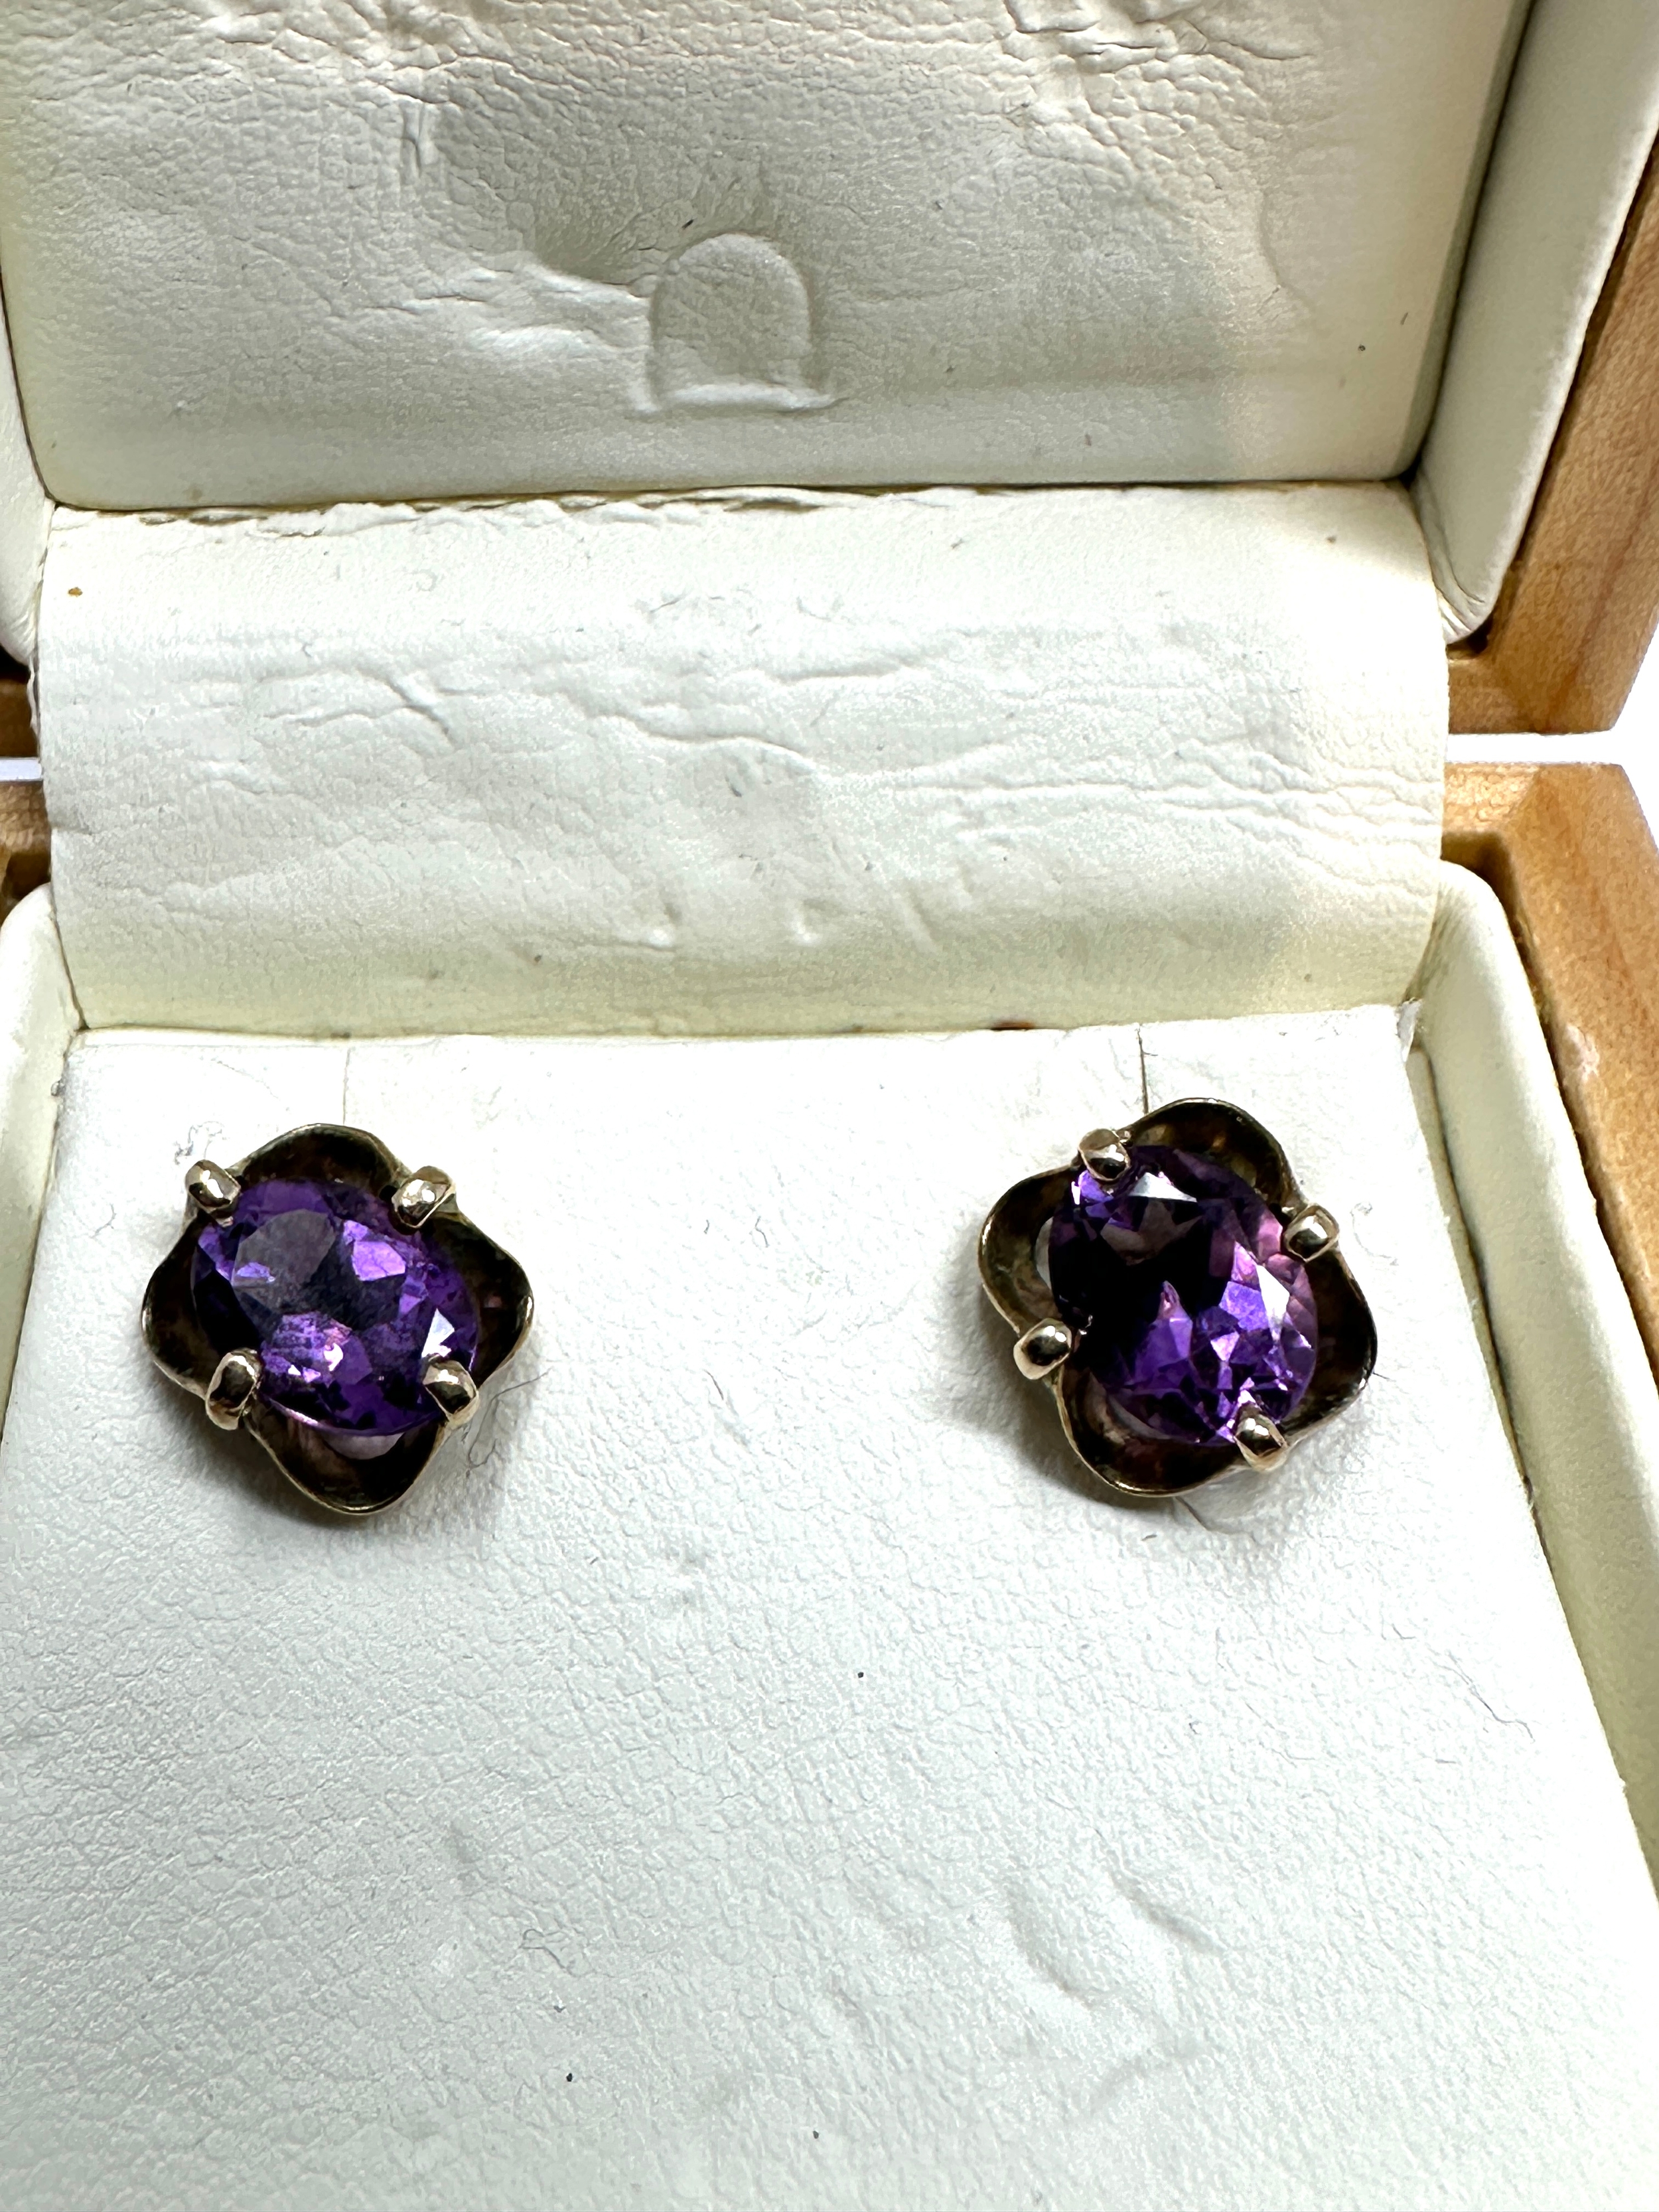 9ct gold amethyst earrings weight 2.5g boxed - Image 2 of 4